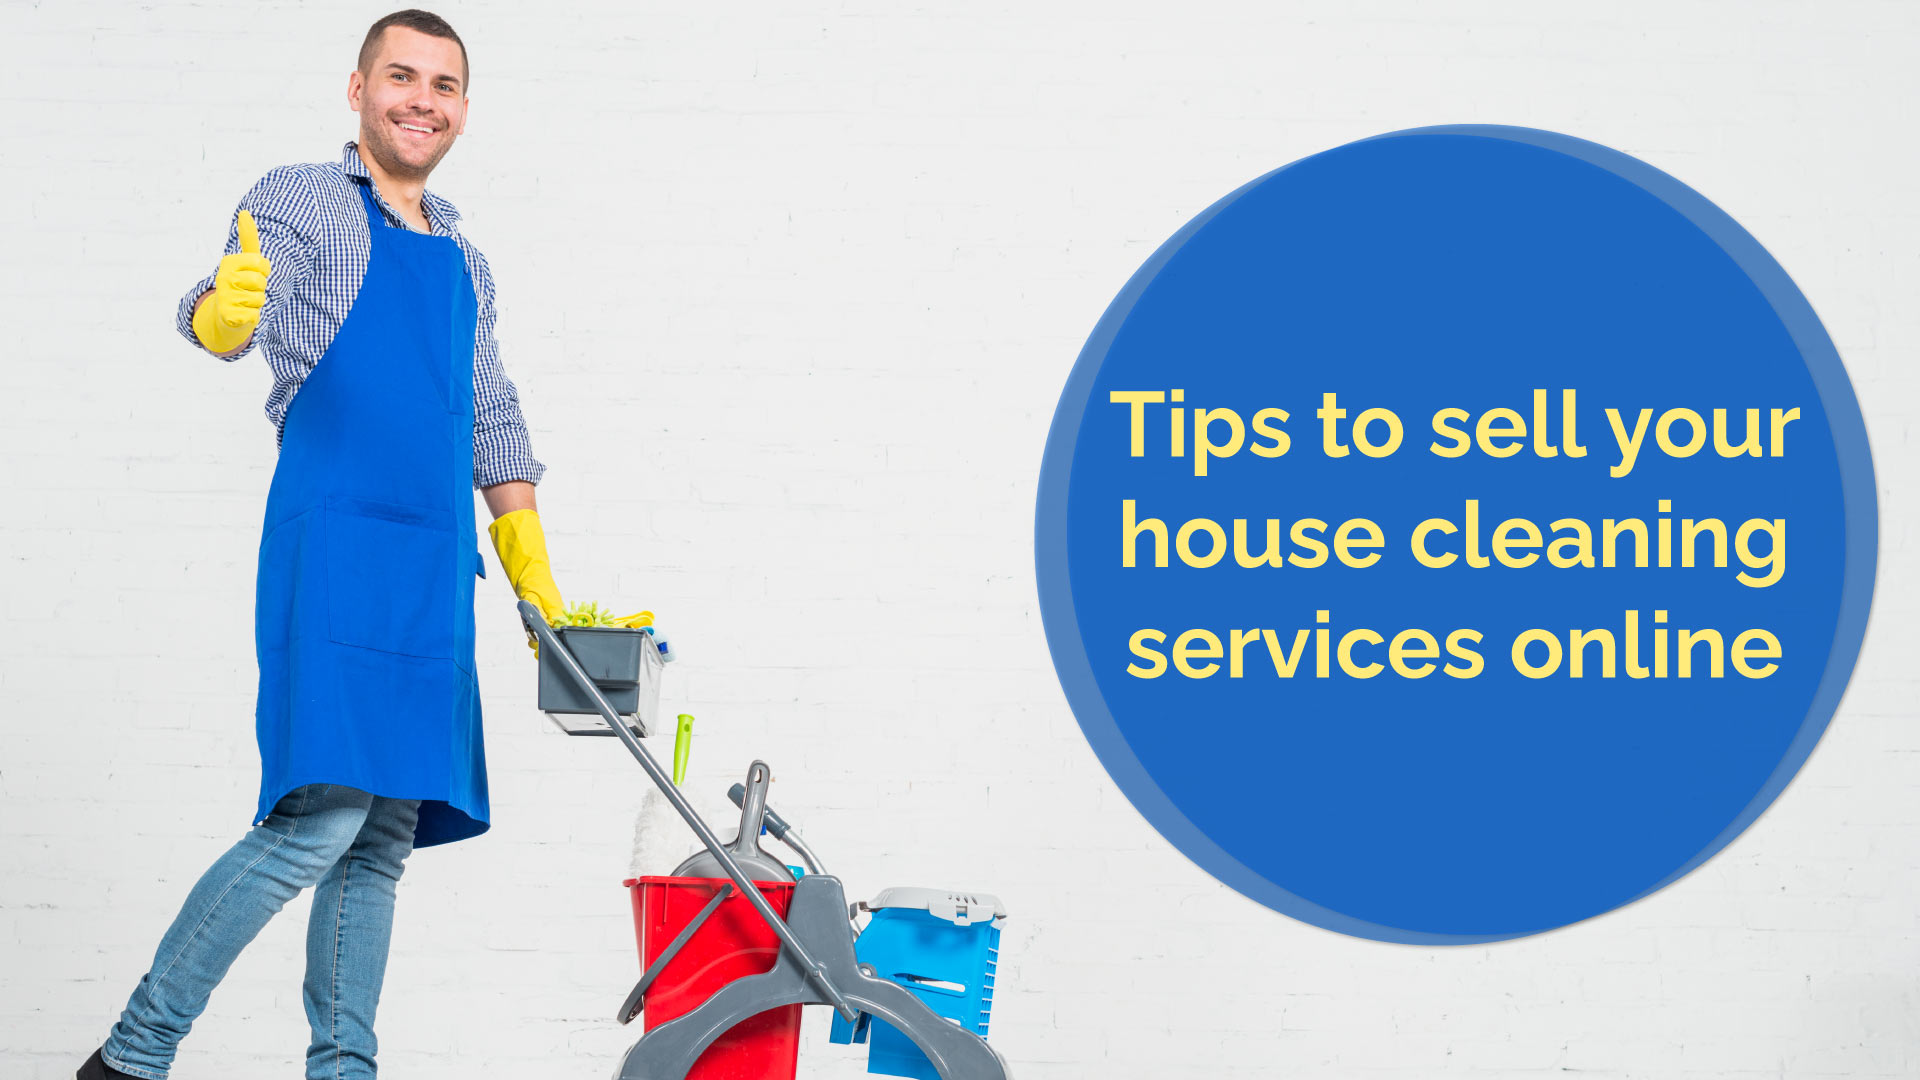 Tips to sell your cleaning business